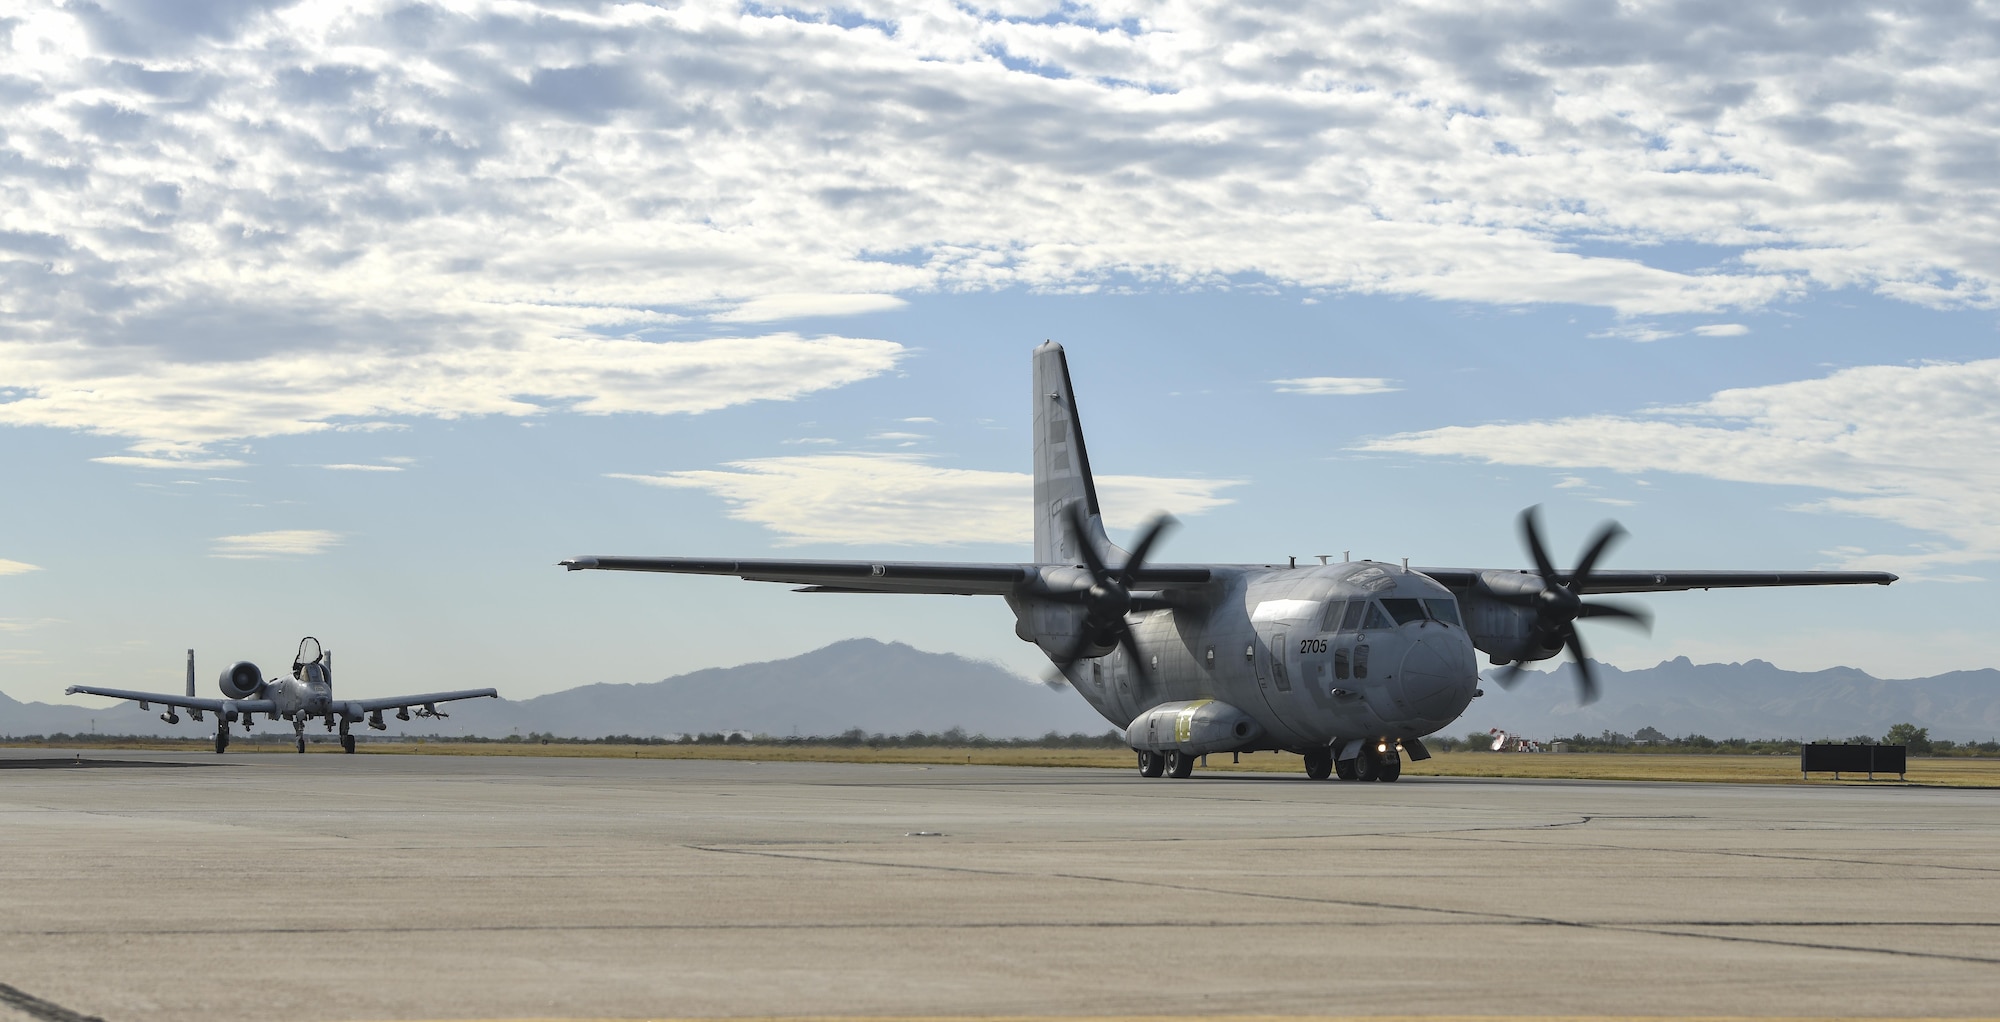 A C-27J Spartan prepares to depart from Davis-Monthan Air Force Base, Oct. 19, 2017. This aircraft was the last of 13 C-27Js which were regenerated from the 309th Aerospace Maintenance and Regeneration Group at D-M and given to the U.S. Coast Guard. (U.S. Air Force photo by Airman 1st Class Frankie D. Moore)